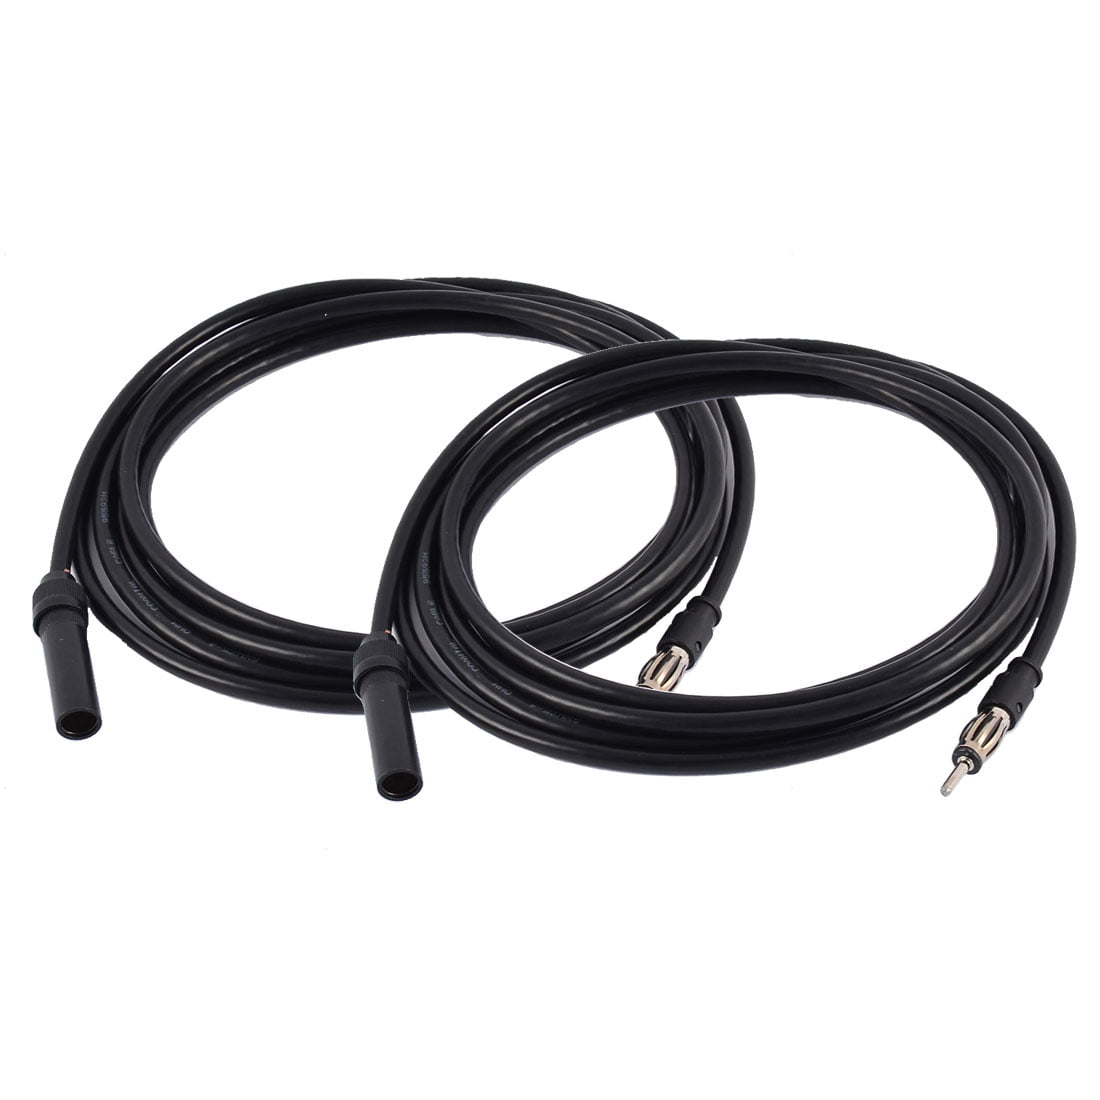 Auto Car FM&AM Antenna ANT Male Female Adapter Cable 12" Extension Cord Wire